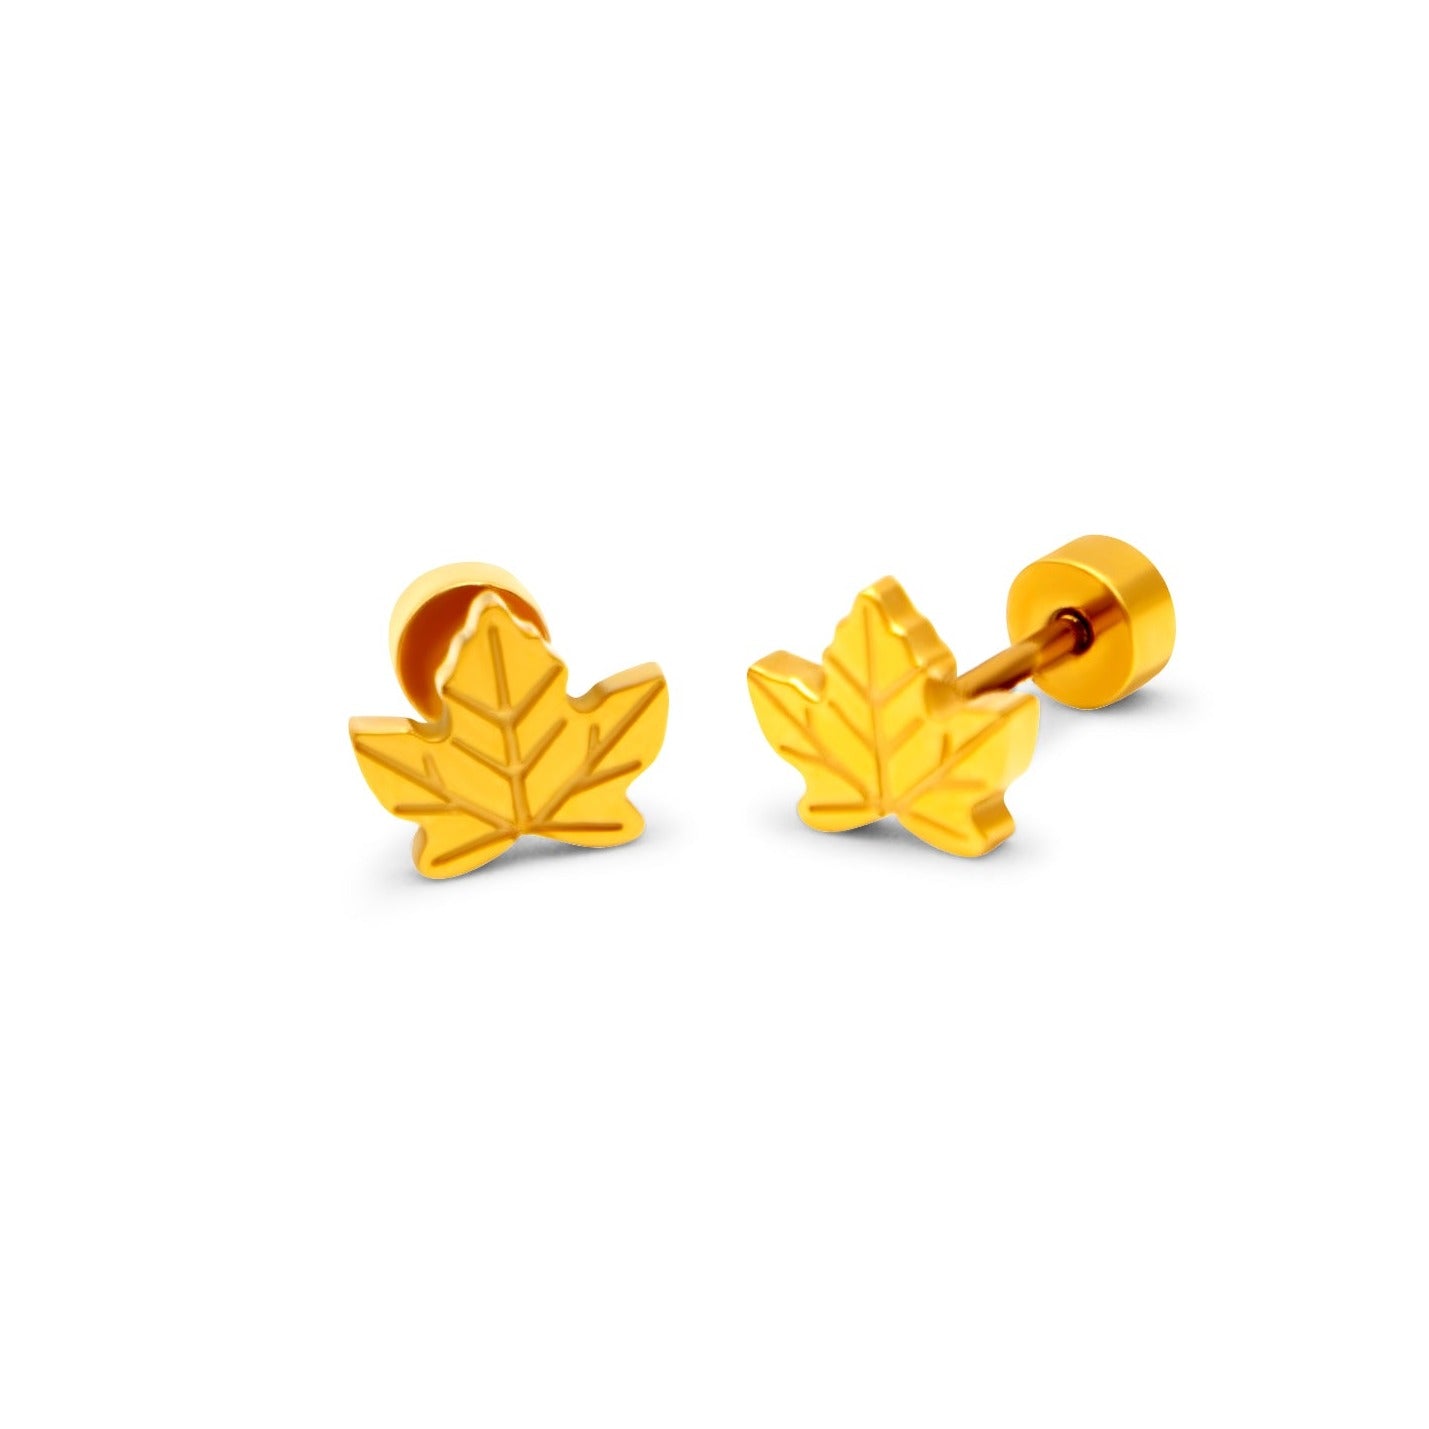 The Maple Leaf Flatback Stud - The Dangle Jewelry Collection